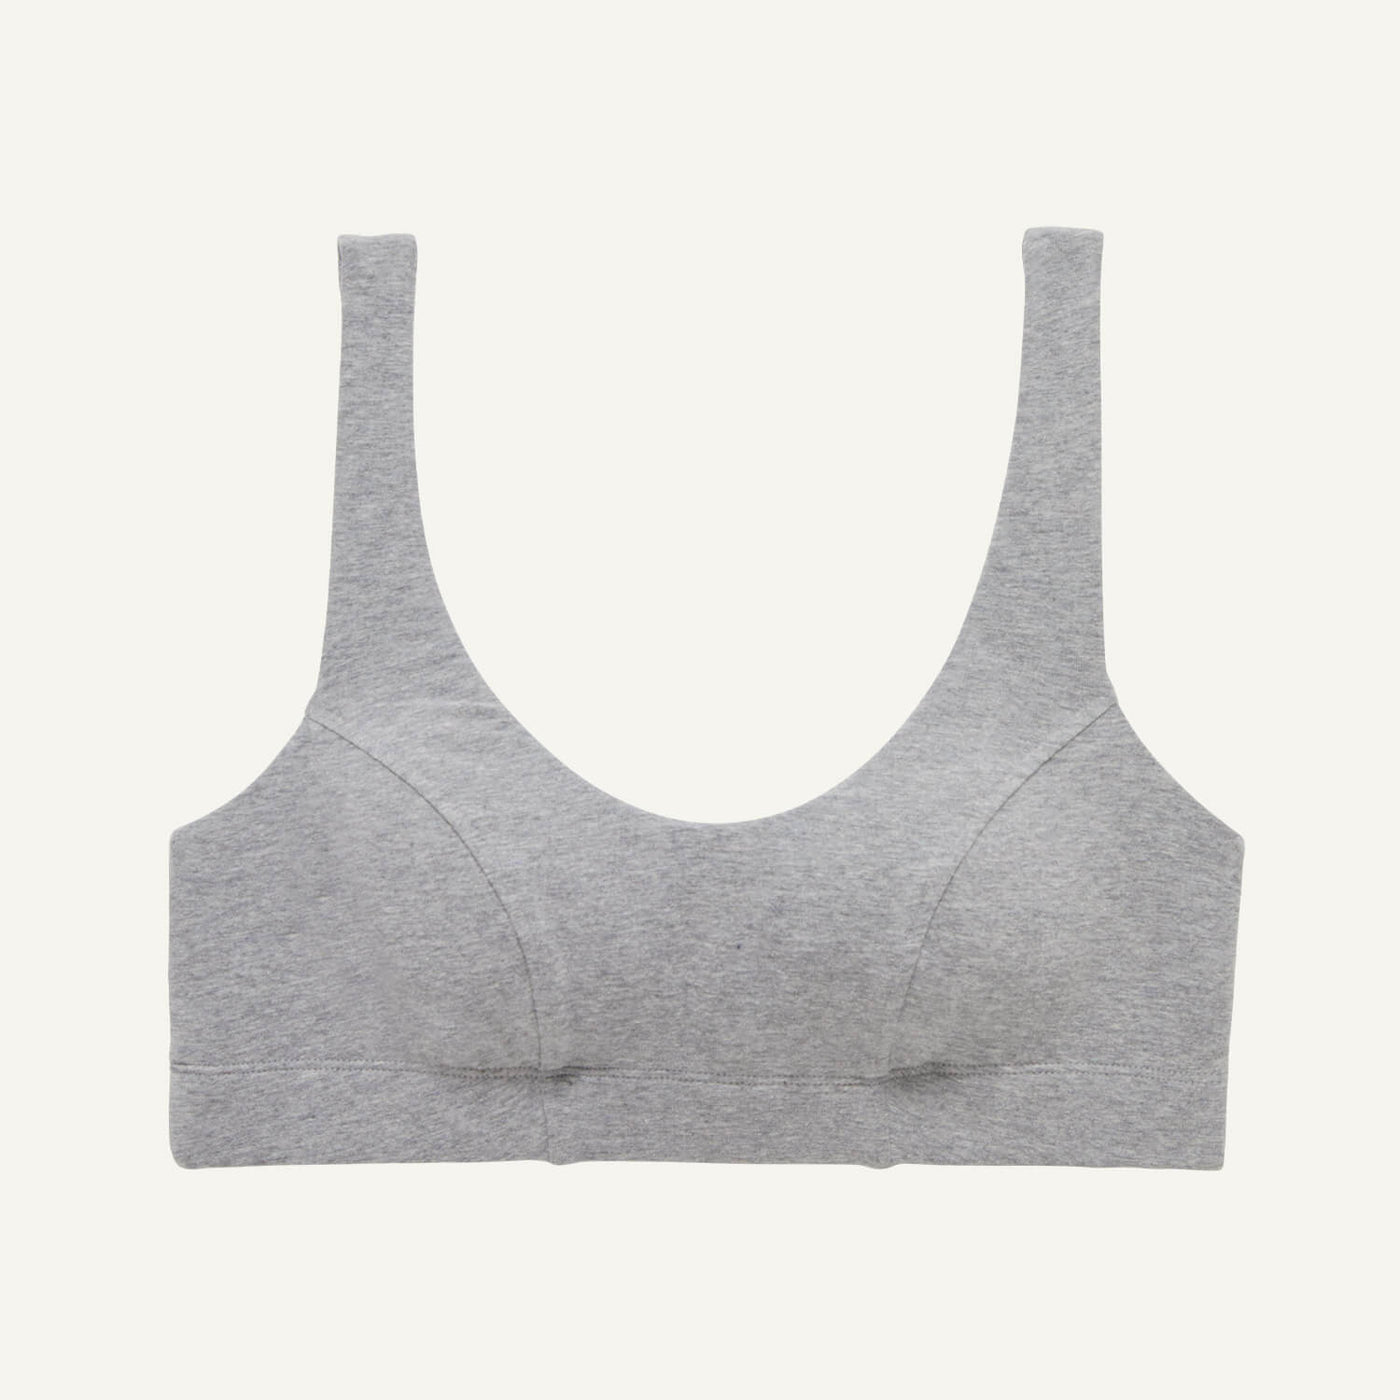 Subset Organic Cotton Scoop Bralette: Available in sizes 2XS-3XL